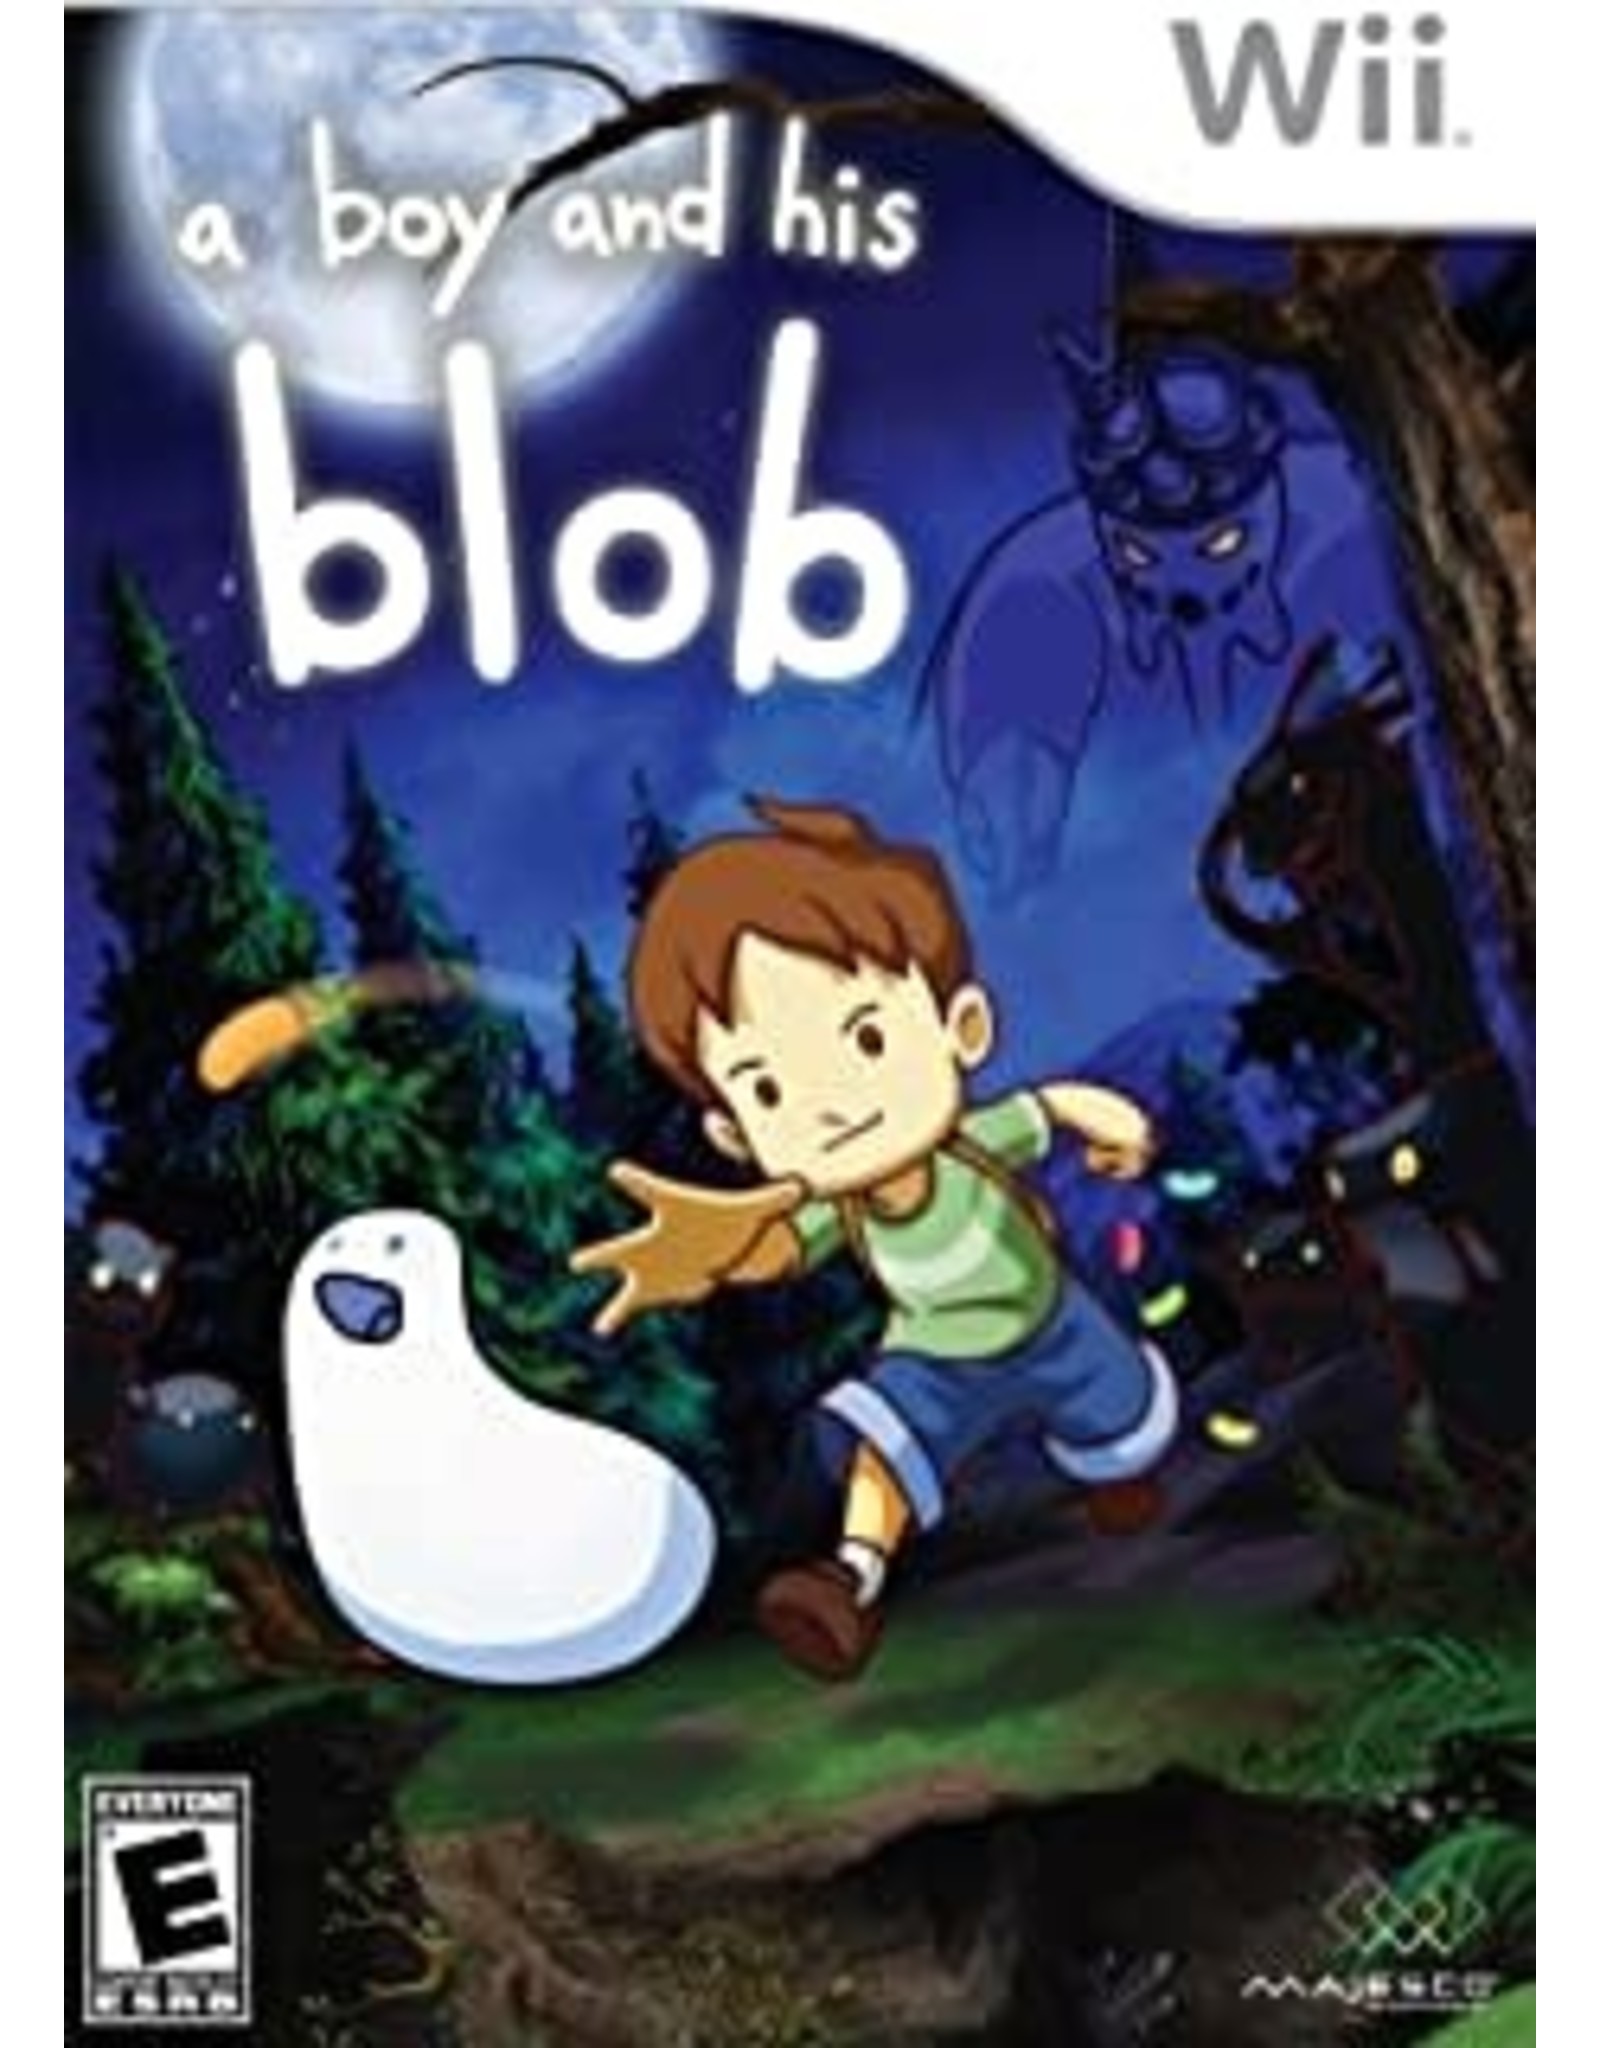 Wii A Boy and His Blob (Used)